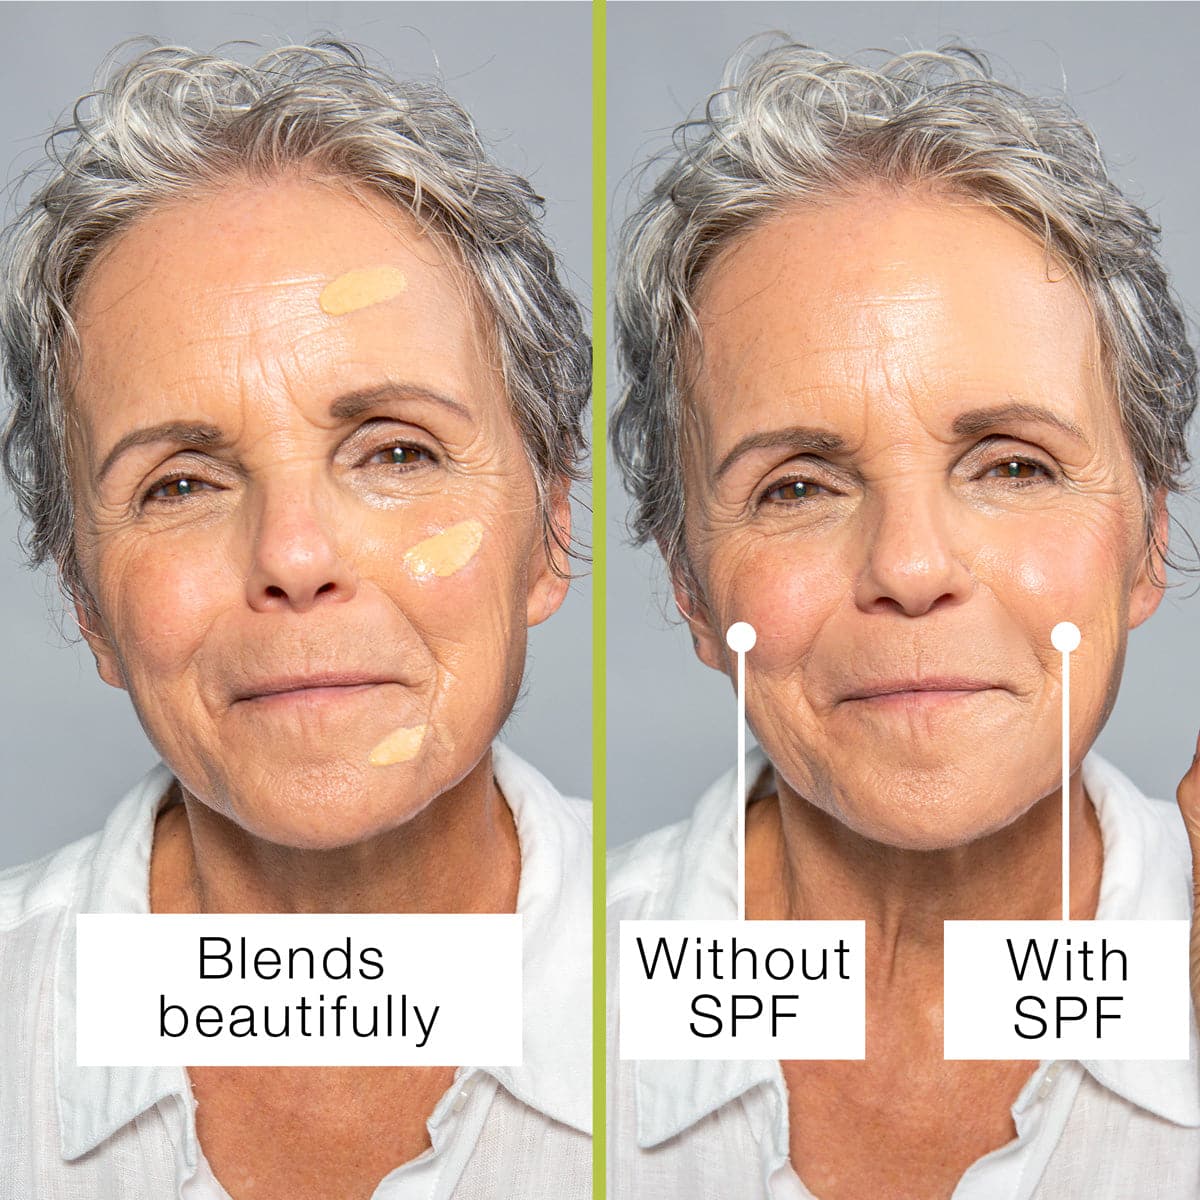 a picture showing a mature woman with short grey hair, the photo on the left saying 'Blends Beautifully' and the one on the right saying 'Without SPF' and 'With SPF' and it shows the woman's face looking more smooth and even-toned once the SPF was blended in. 